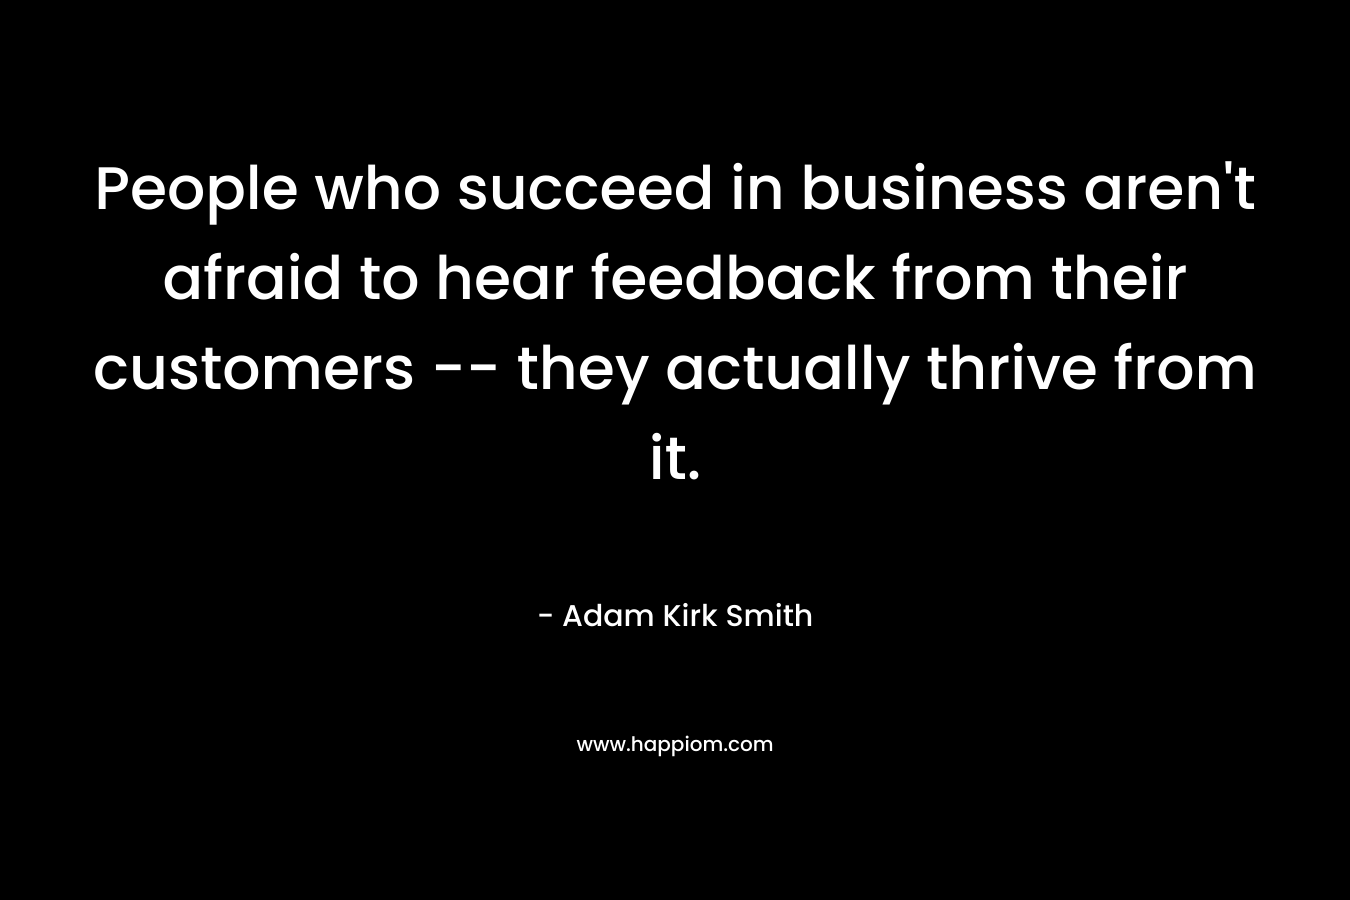 People who succeed in business aren't afraid to hear feedback from their customers -- they actually thrive from it.